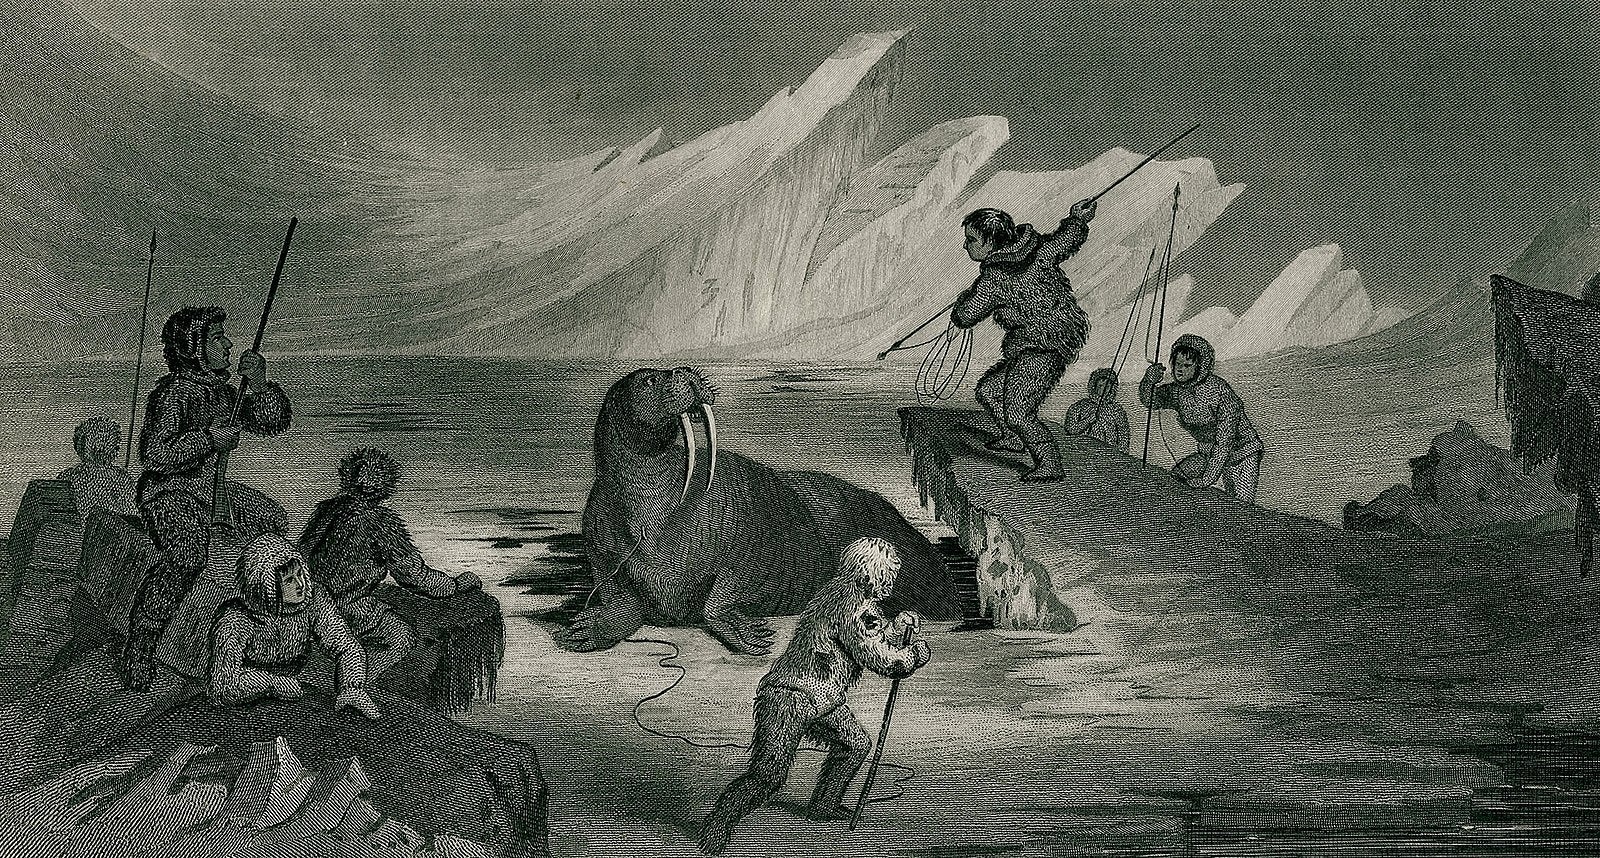 The ivory sculpture of Christ being brought down from the Cross was made in the late 12th century from Greenlandic walrus ivory, but Arctic walrus hunting continued for centuries, as this 19th century image demonstrates